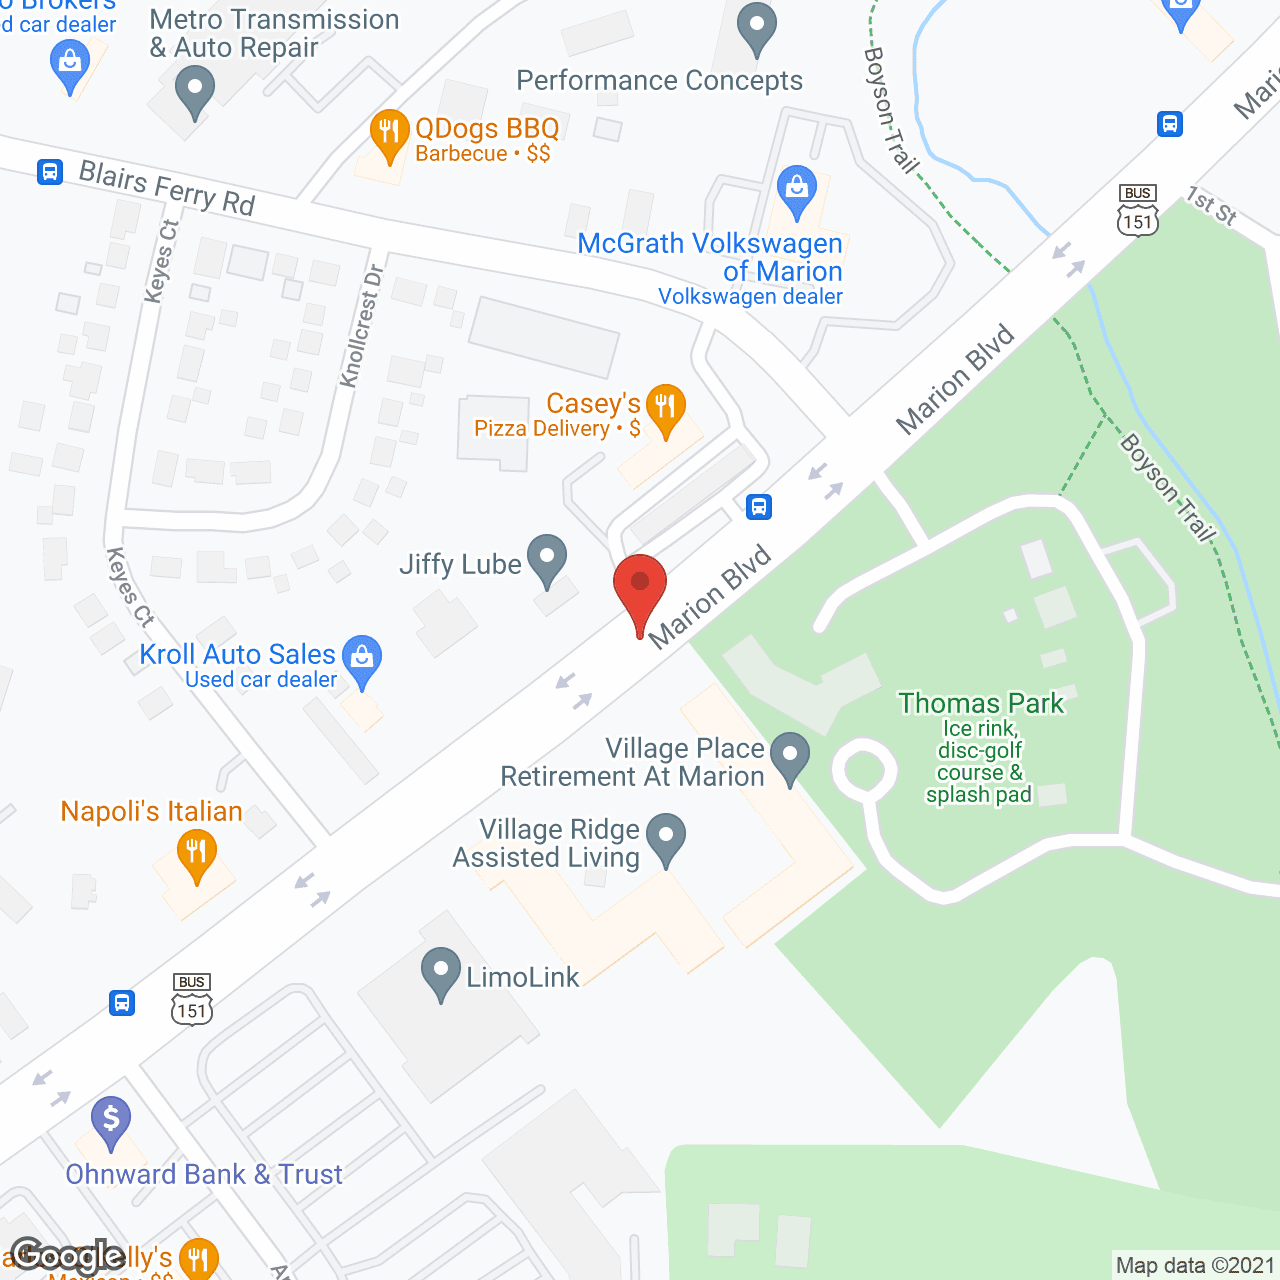 Village Place in google map